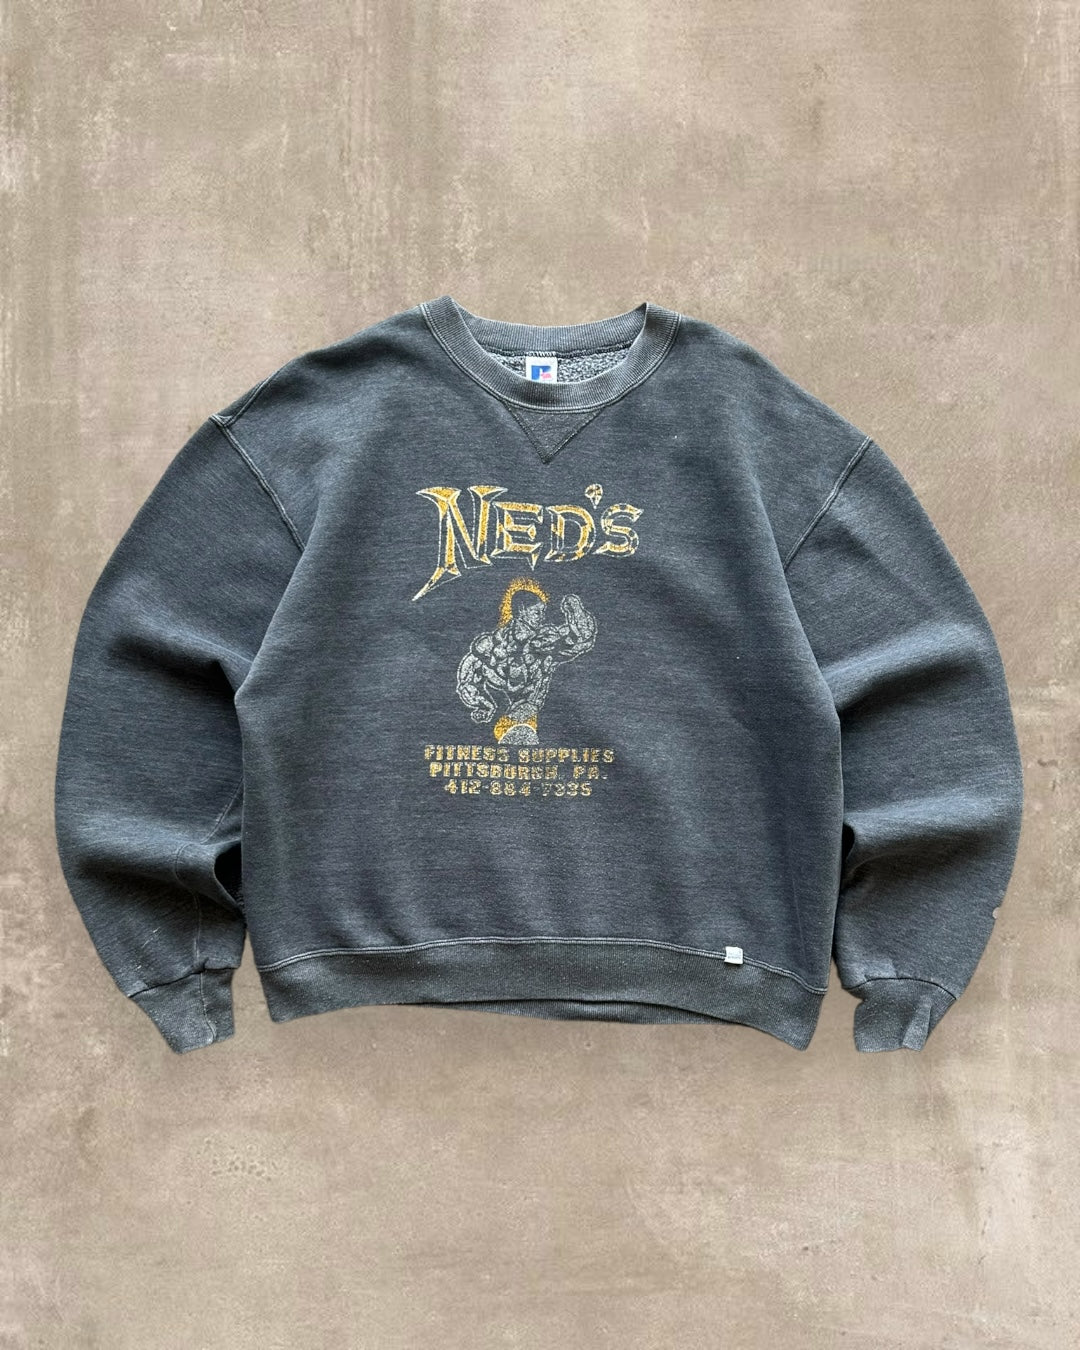 90s Ned’s Fitness Supplies Crewneck - M/L